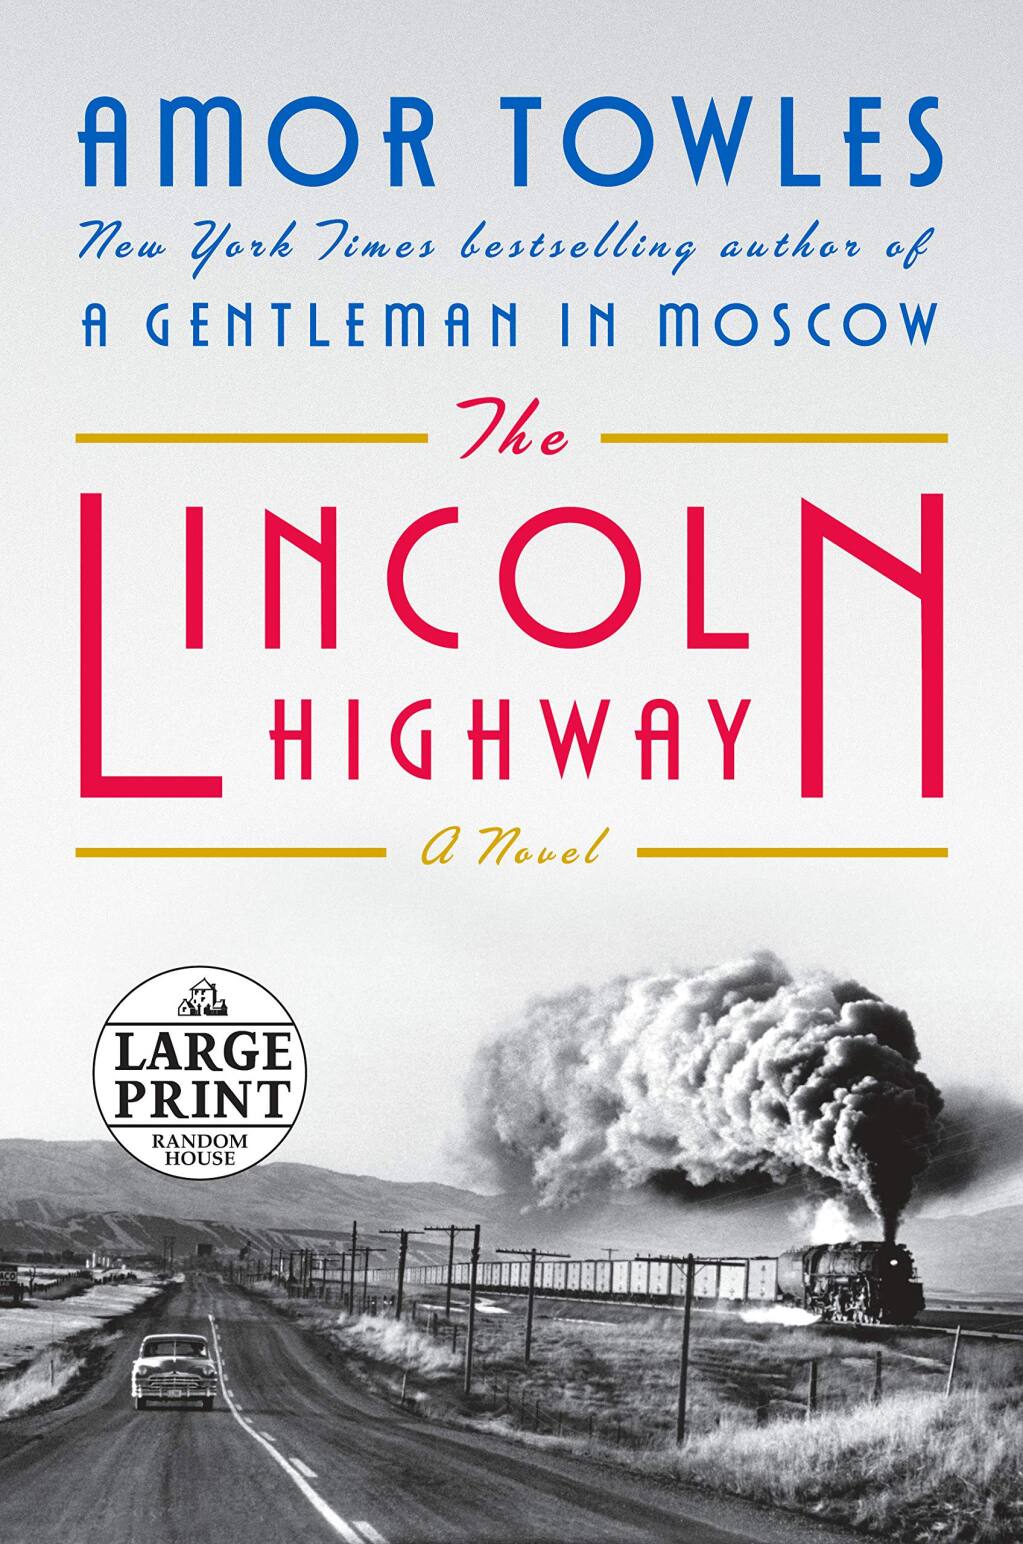 Amor Towles’ “The Lincoln Highway” is the No. 1 bestselling book in Petaluma this week. (VIKING BOOKS)